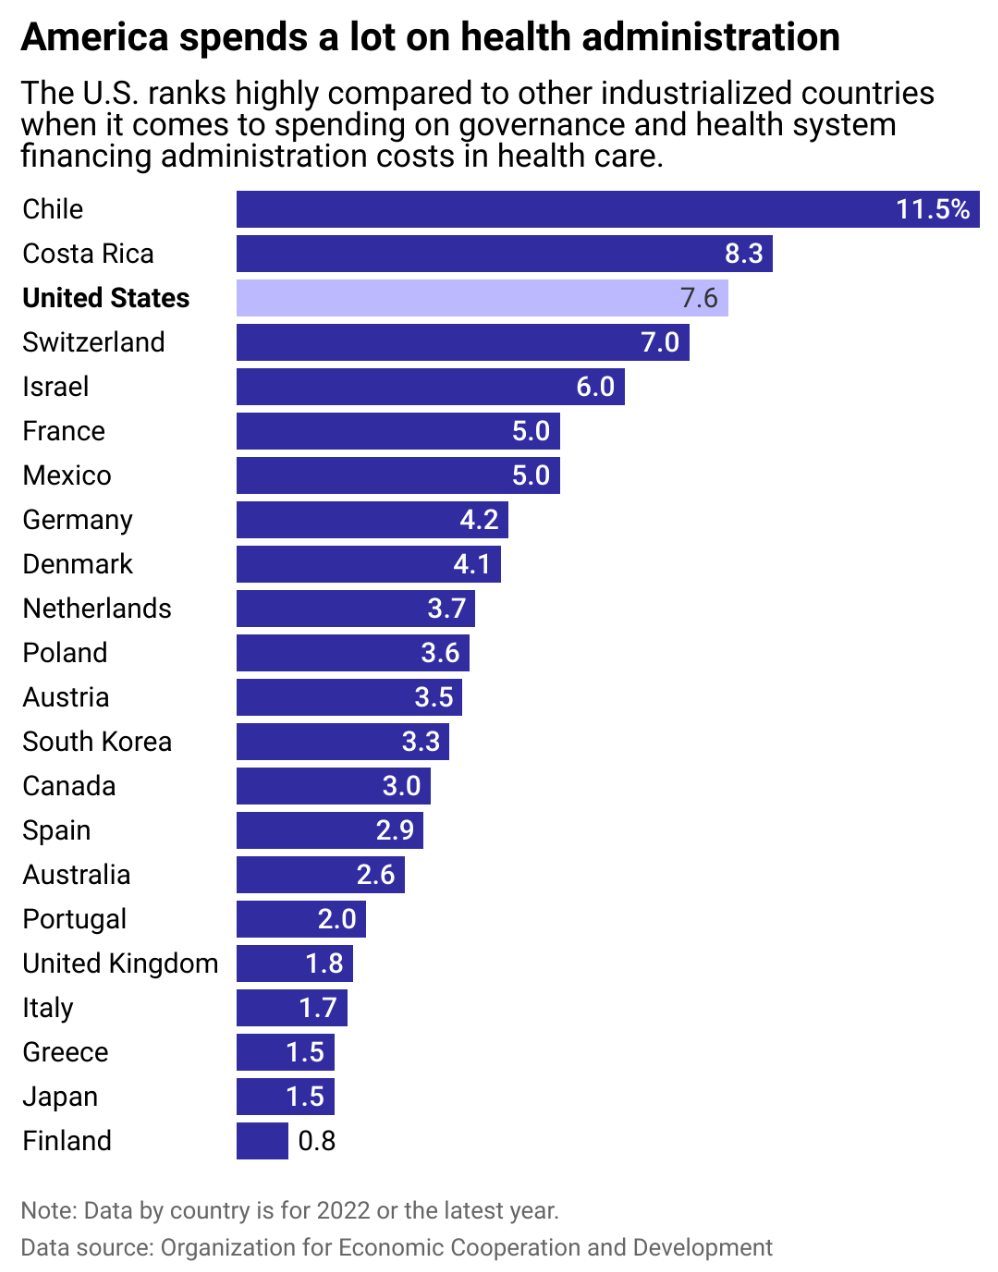 America spend a lot on healthcare administration